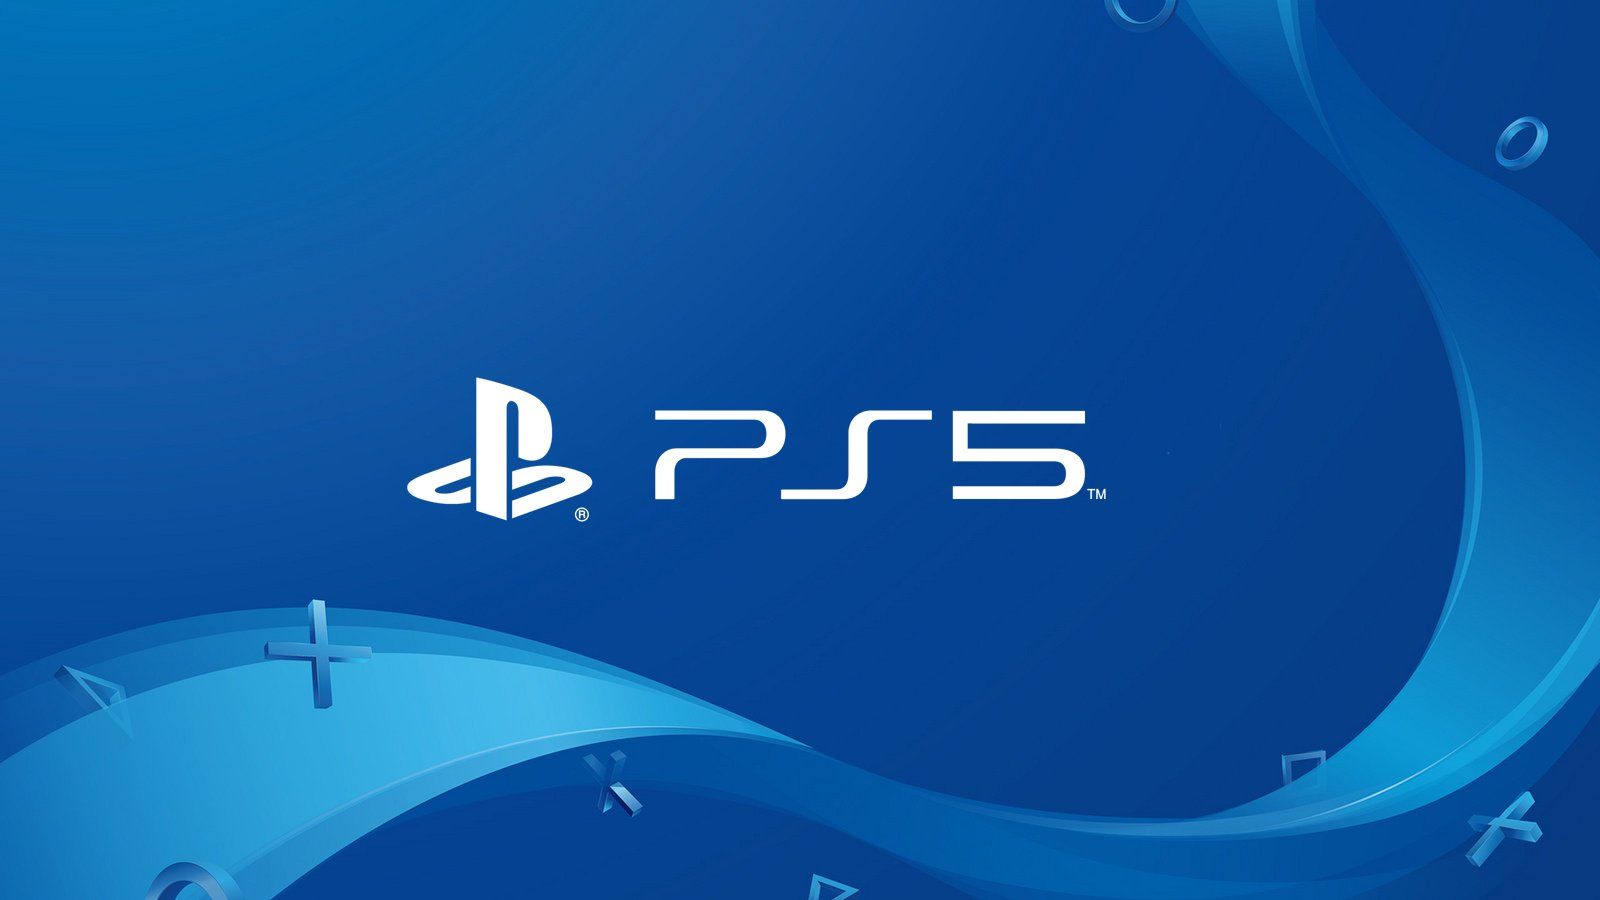 PlayStation 5 Pre Order: When Can You Pre-order PS5? - Otakukart News